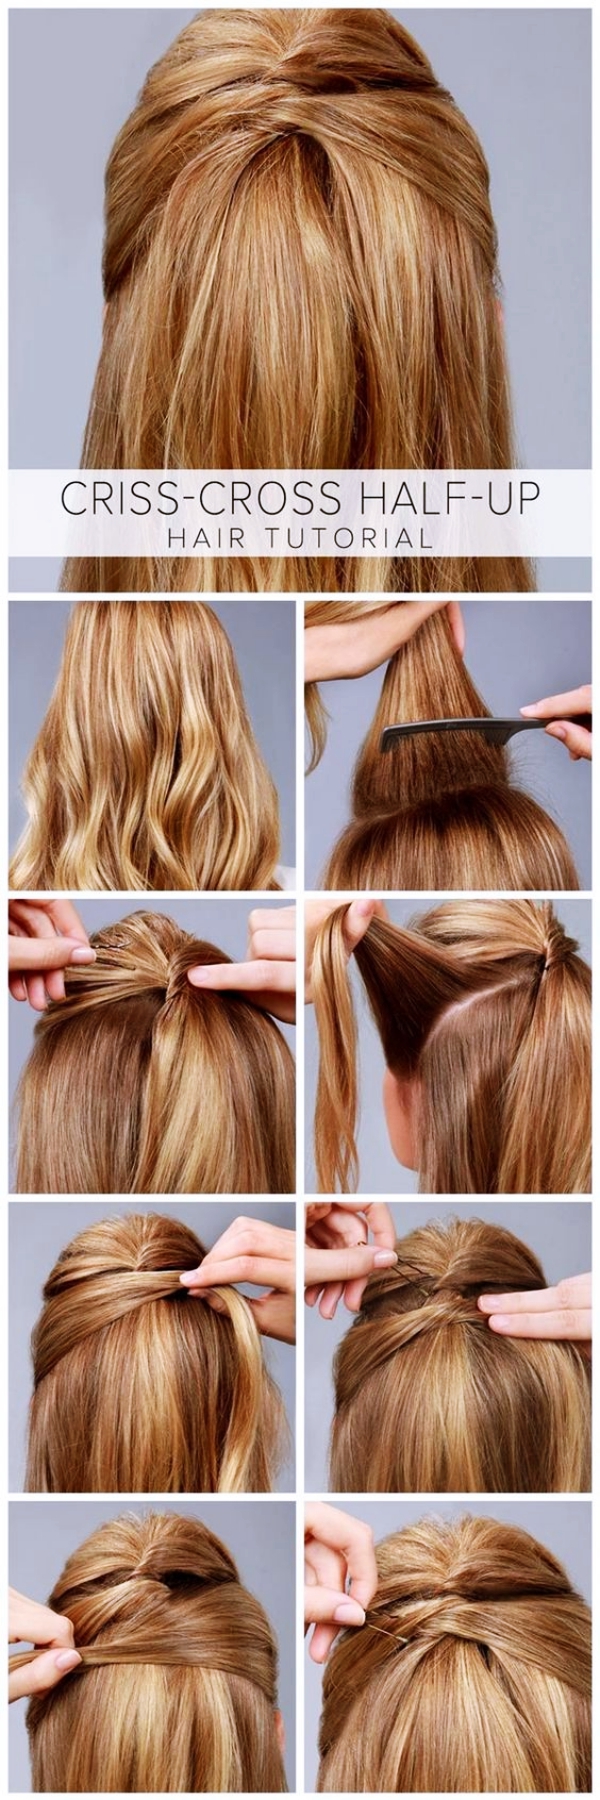 20 Cute and Easy Hairstyles for Work